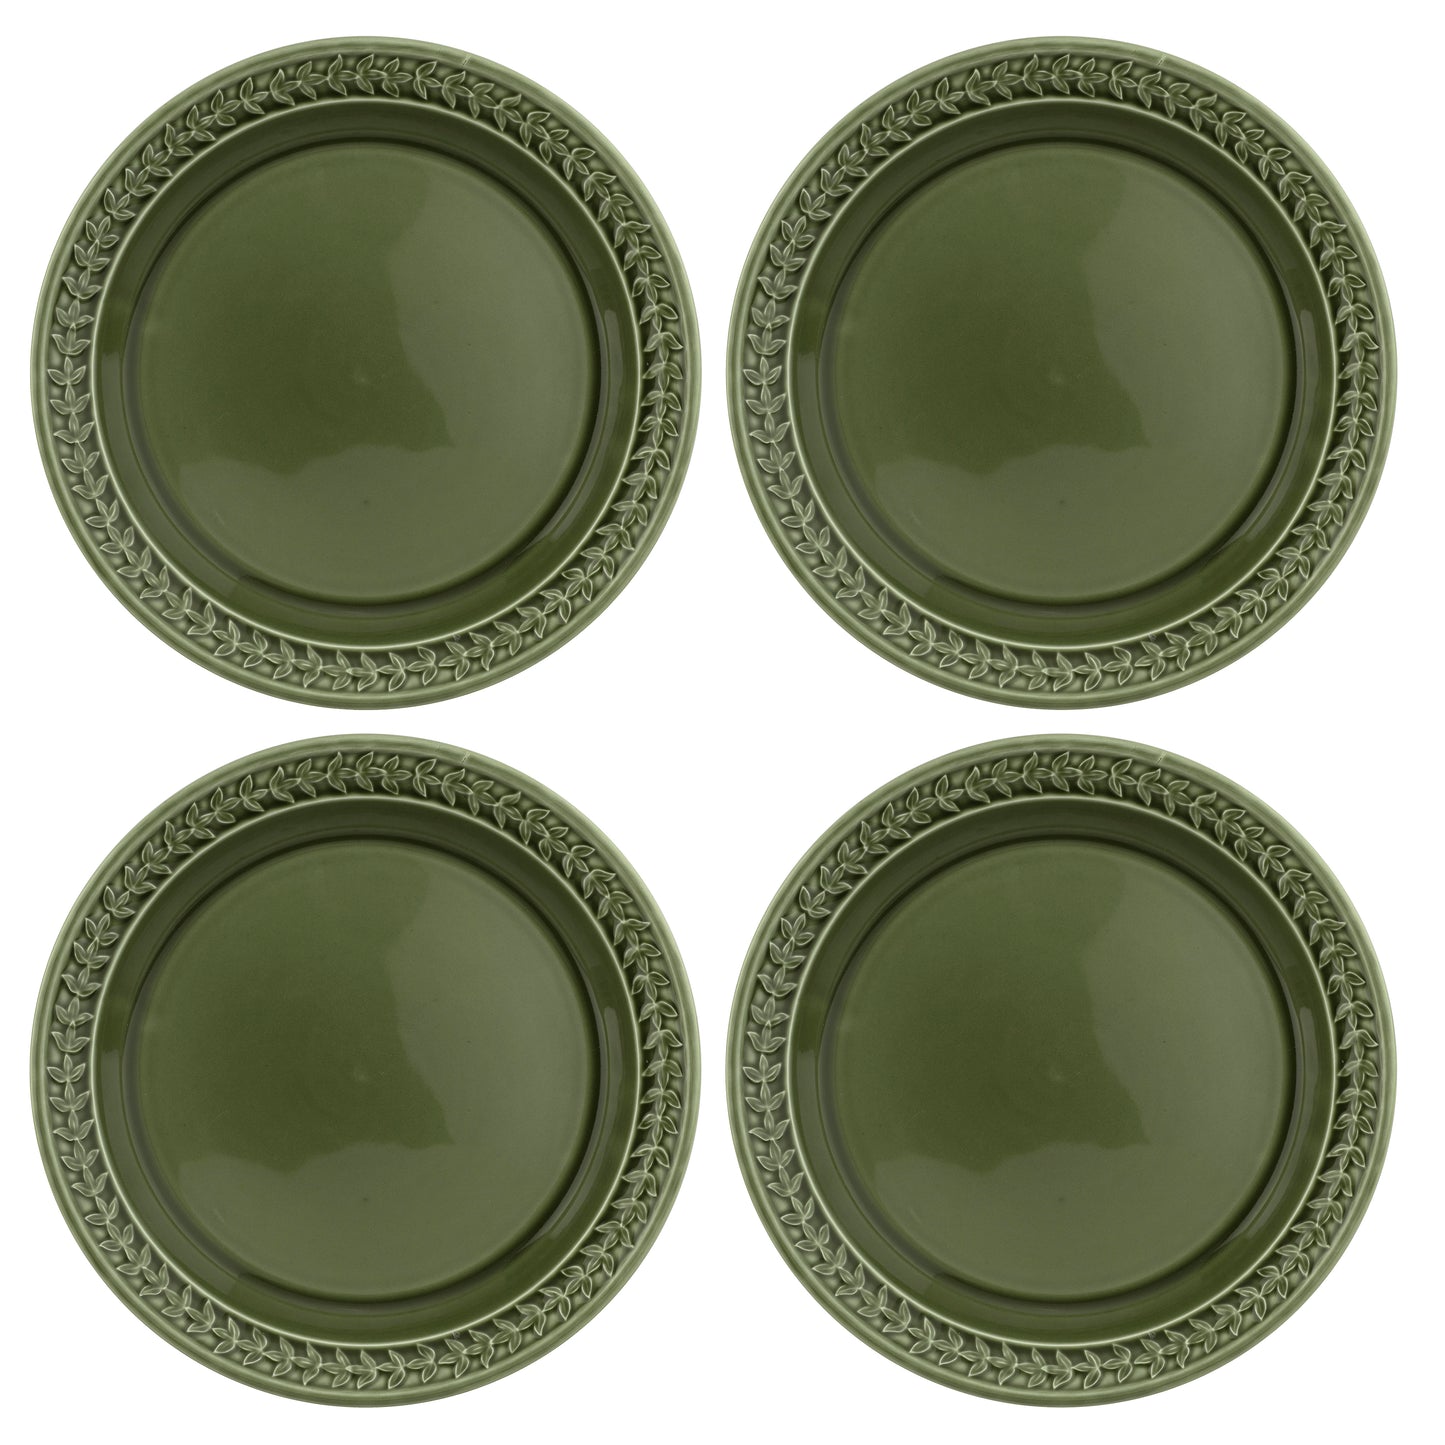 Dinner plate - Forest Green set of 2